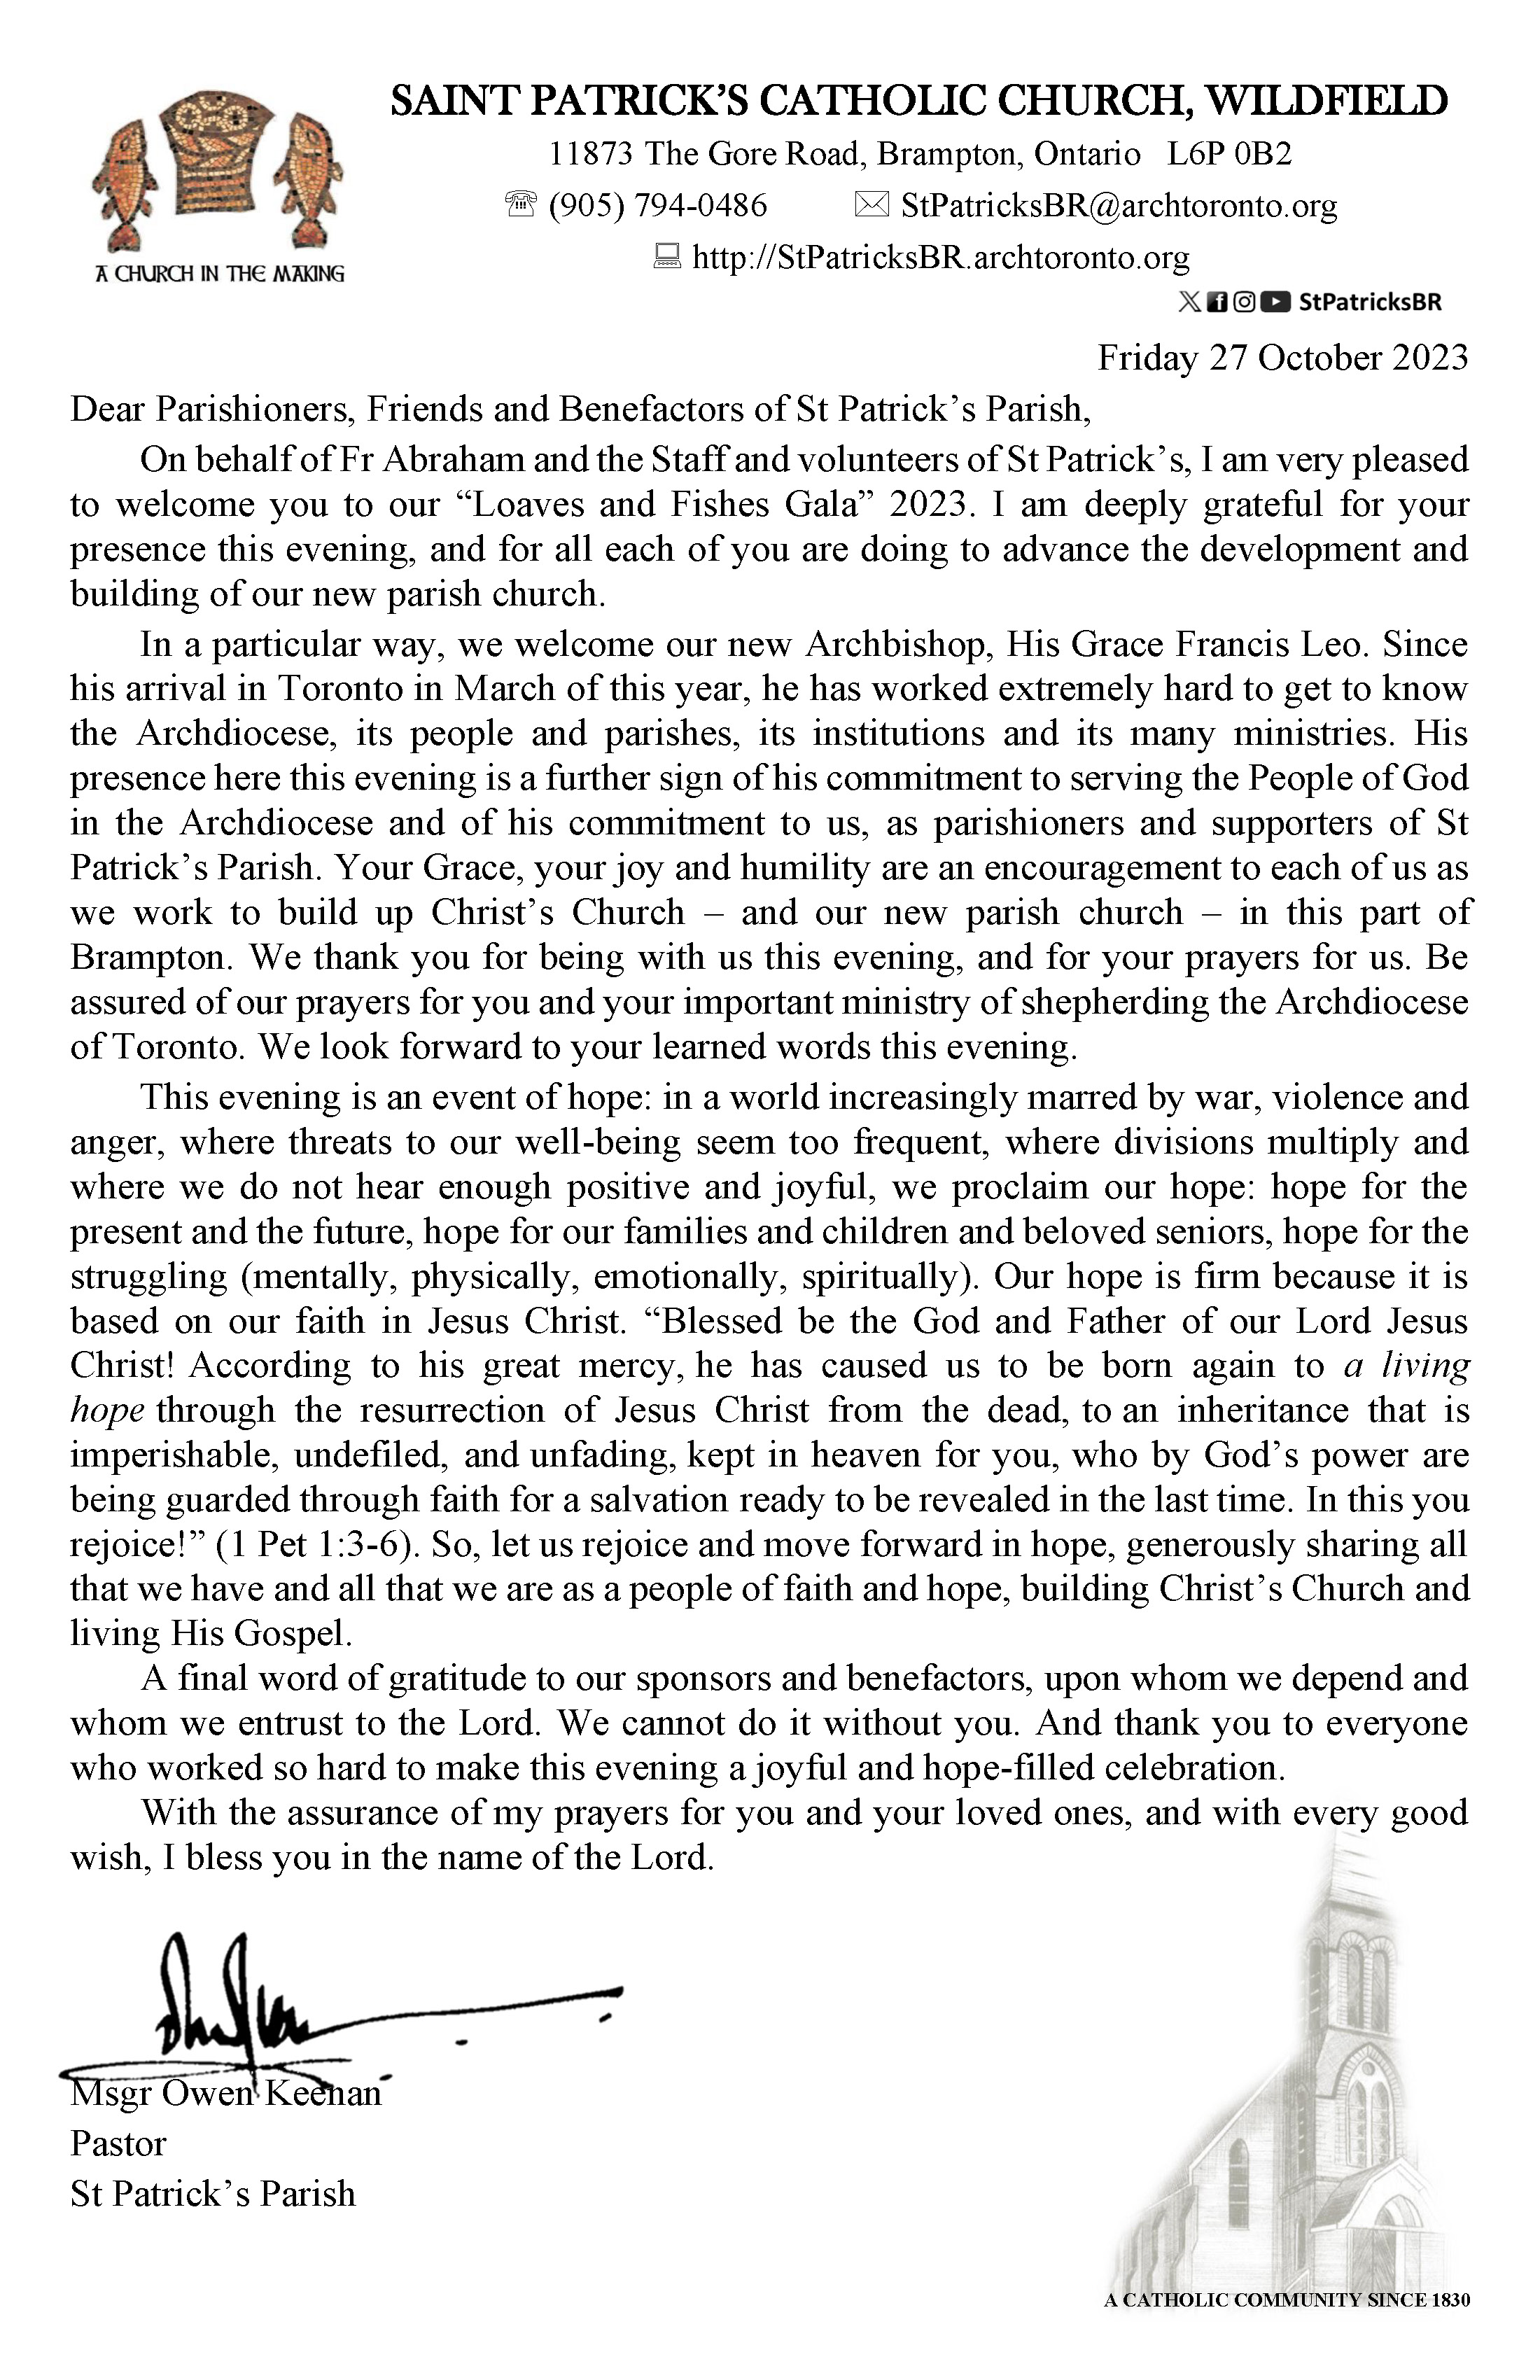 October 2023 letter from Monsignor for the Gala